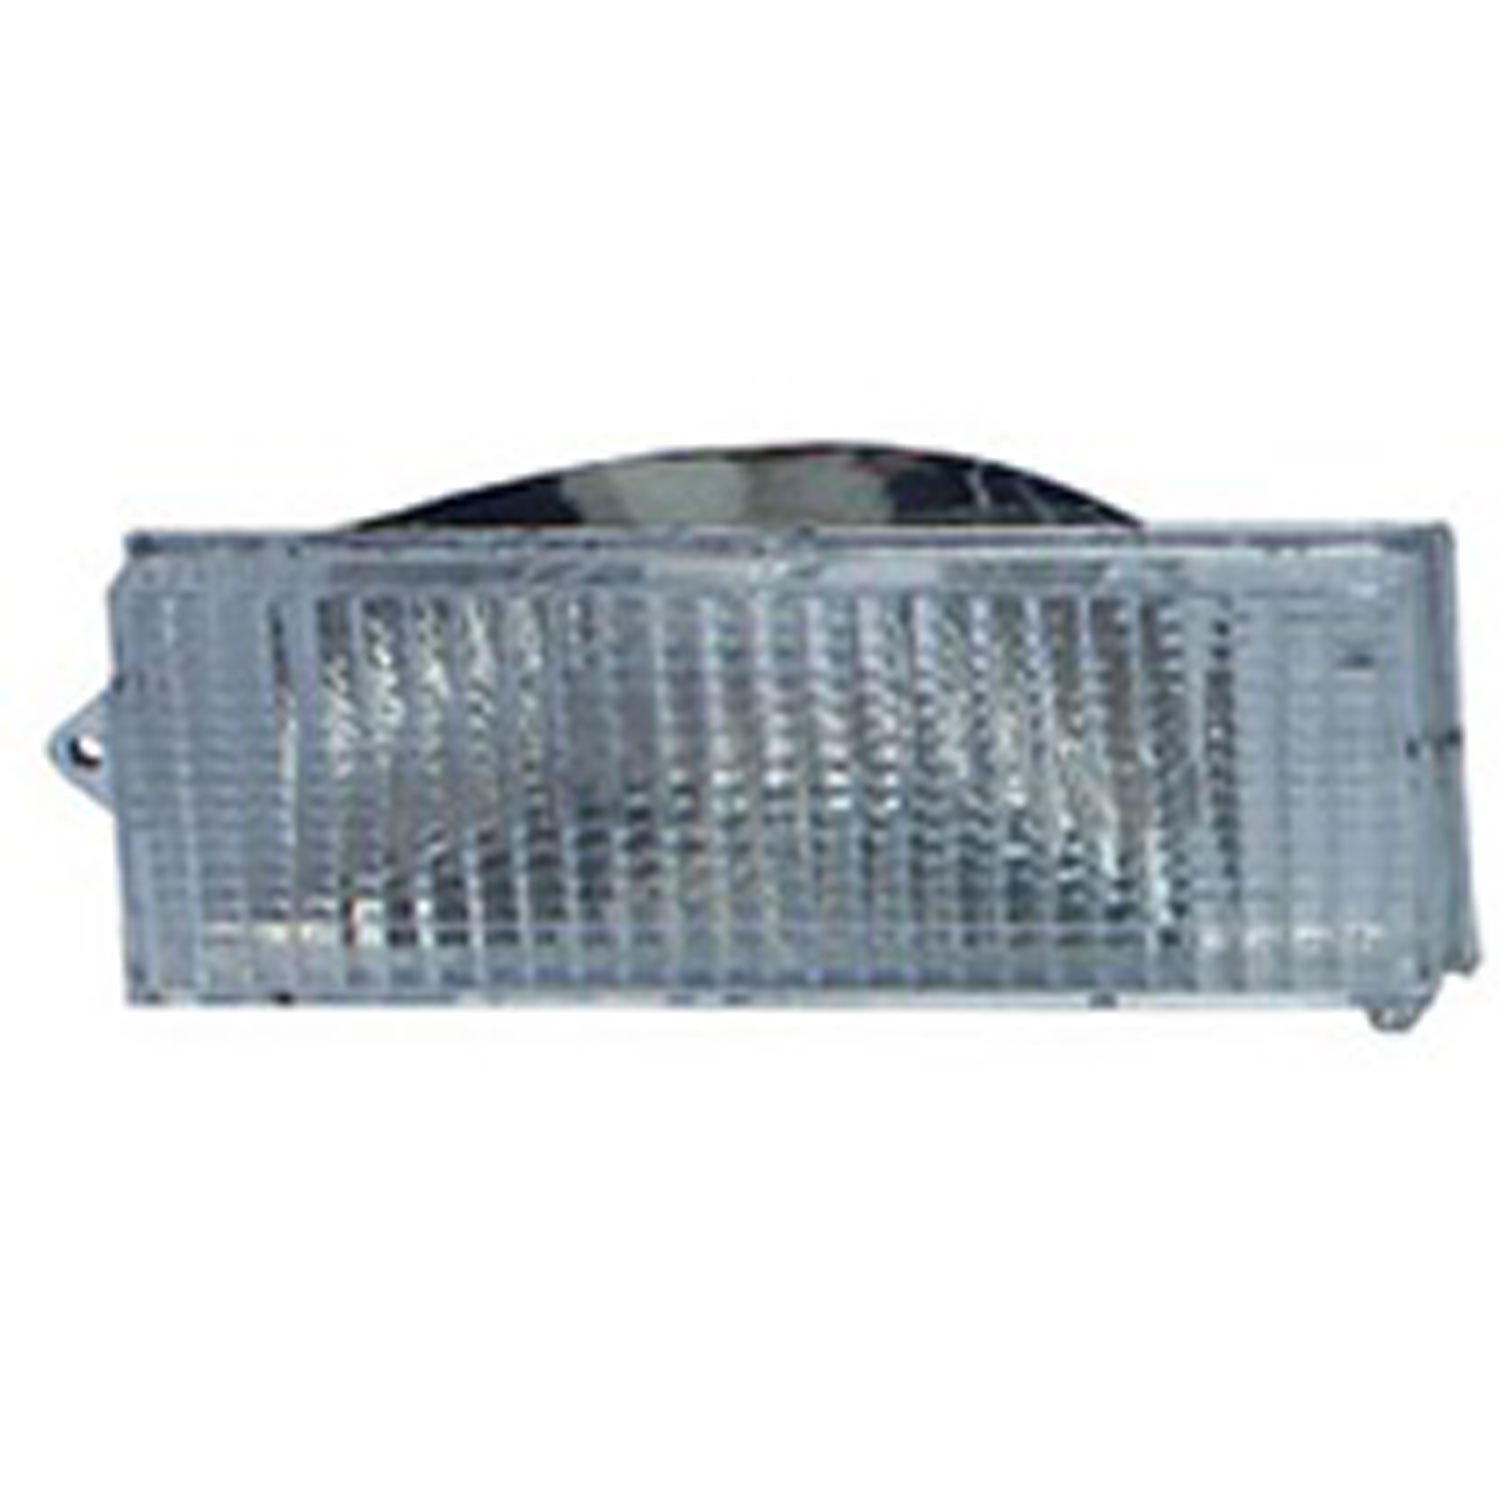 Replacement parking lamp from Omix-ADA, Fits left side of 84-96 Jeep Cherokee XJ